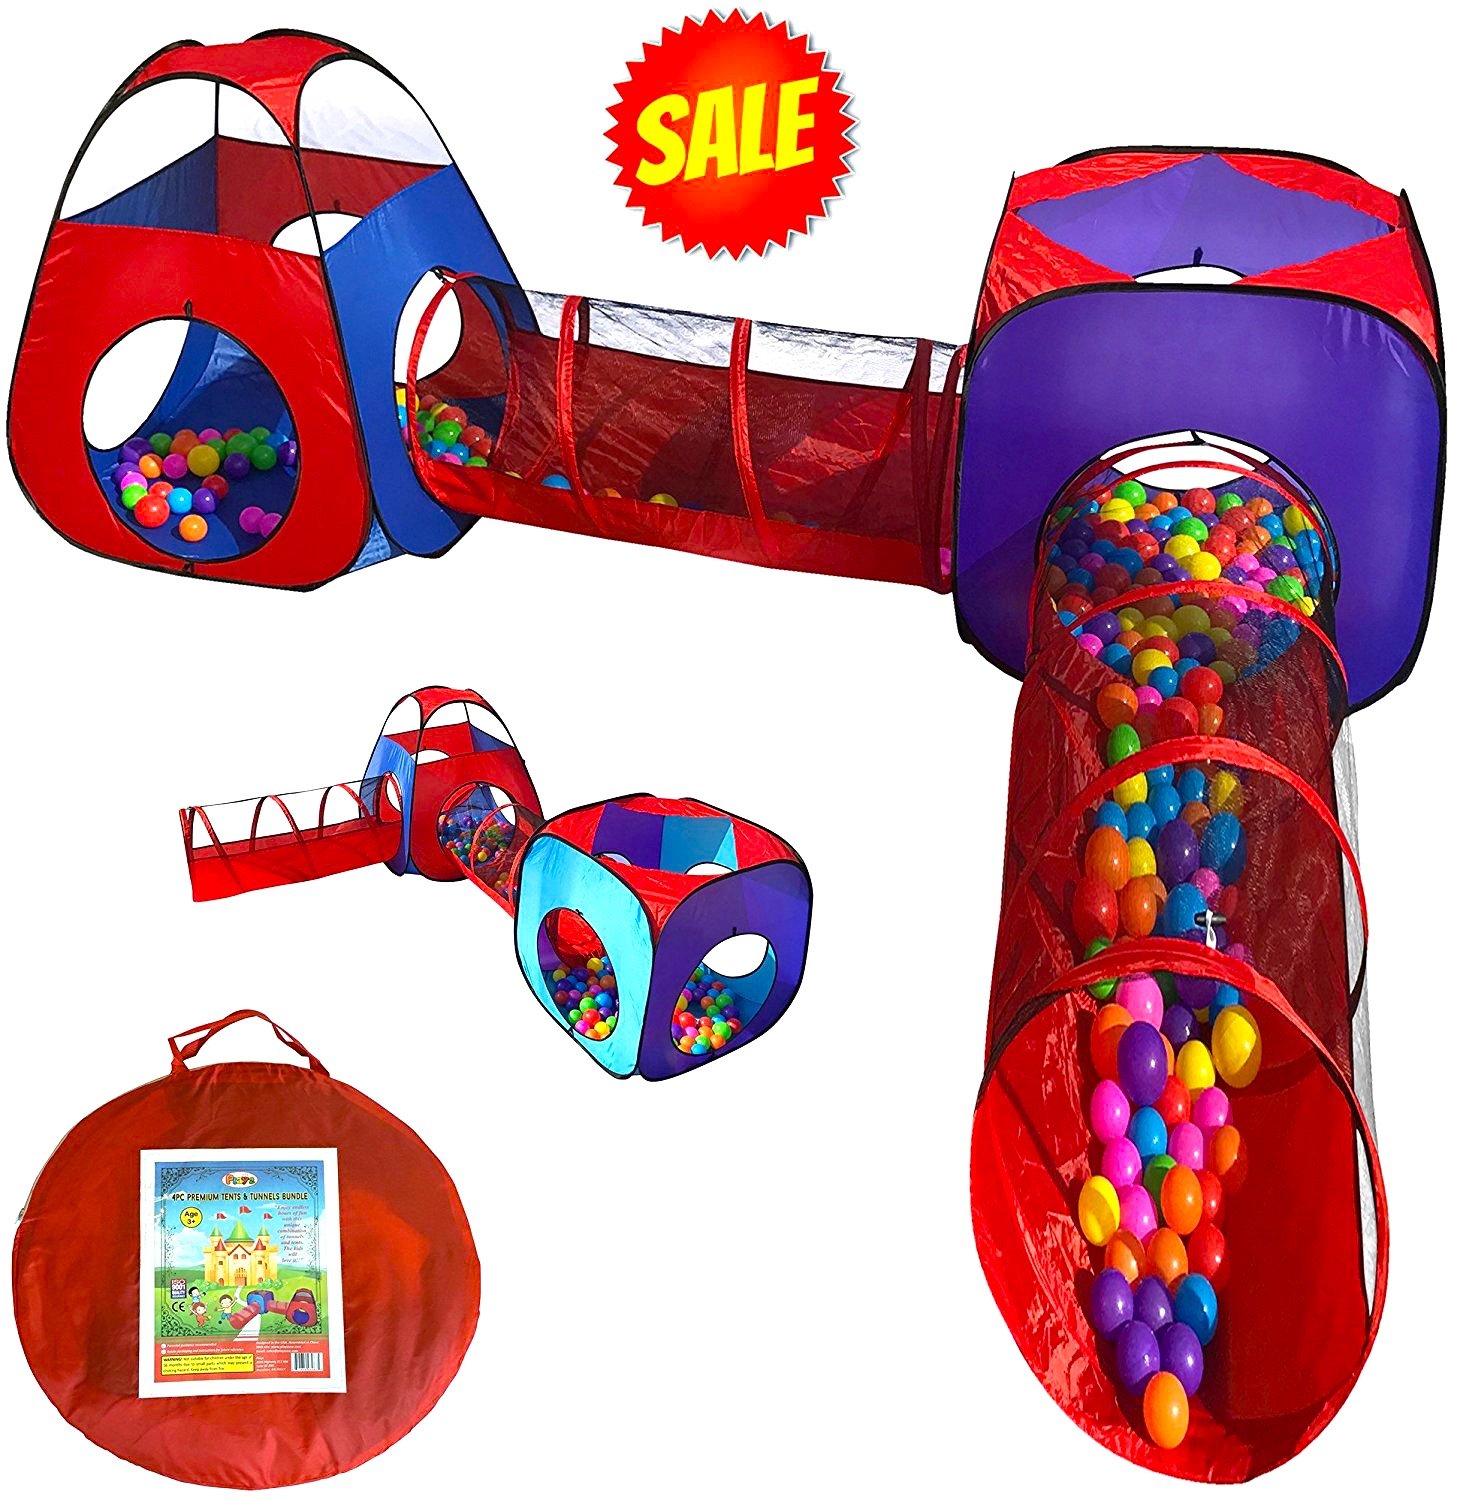 7 Best Crawling Tunnels for Toddlers 2023 - Buying Guide 7